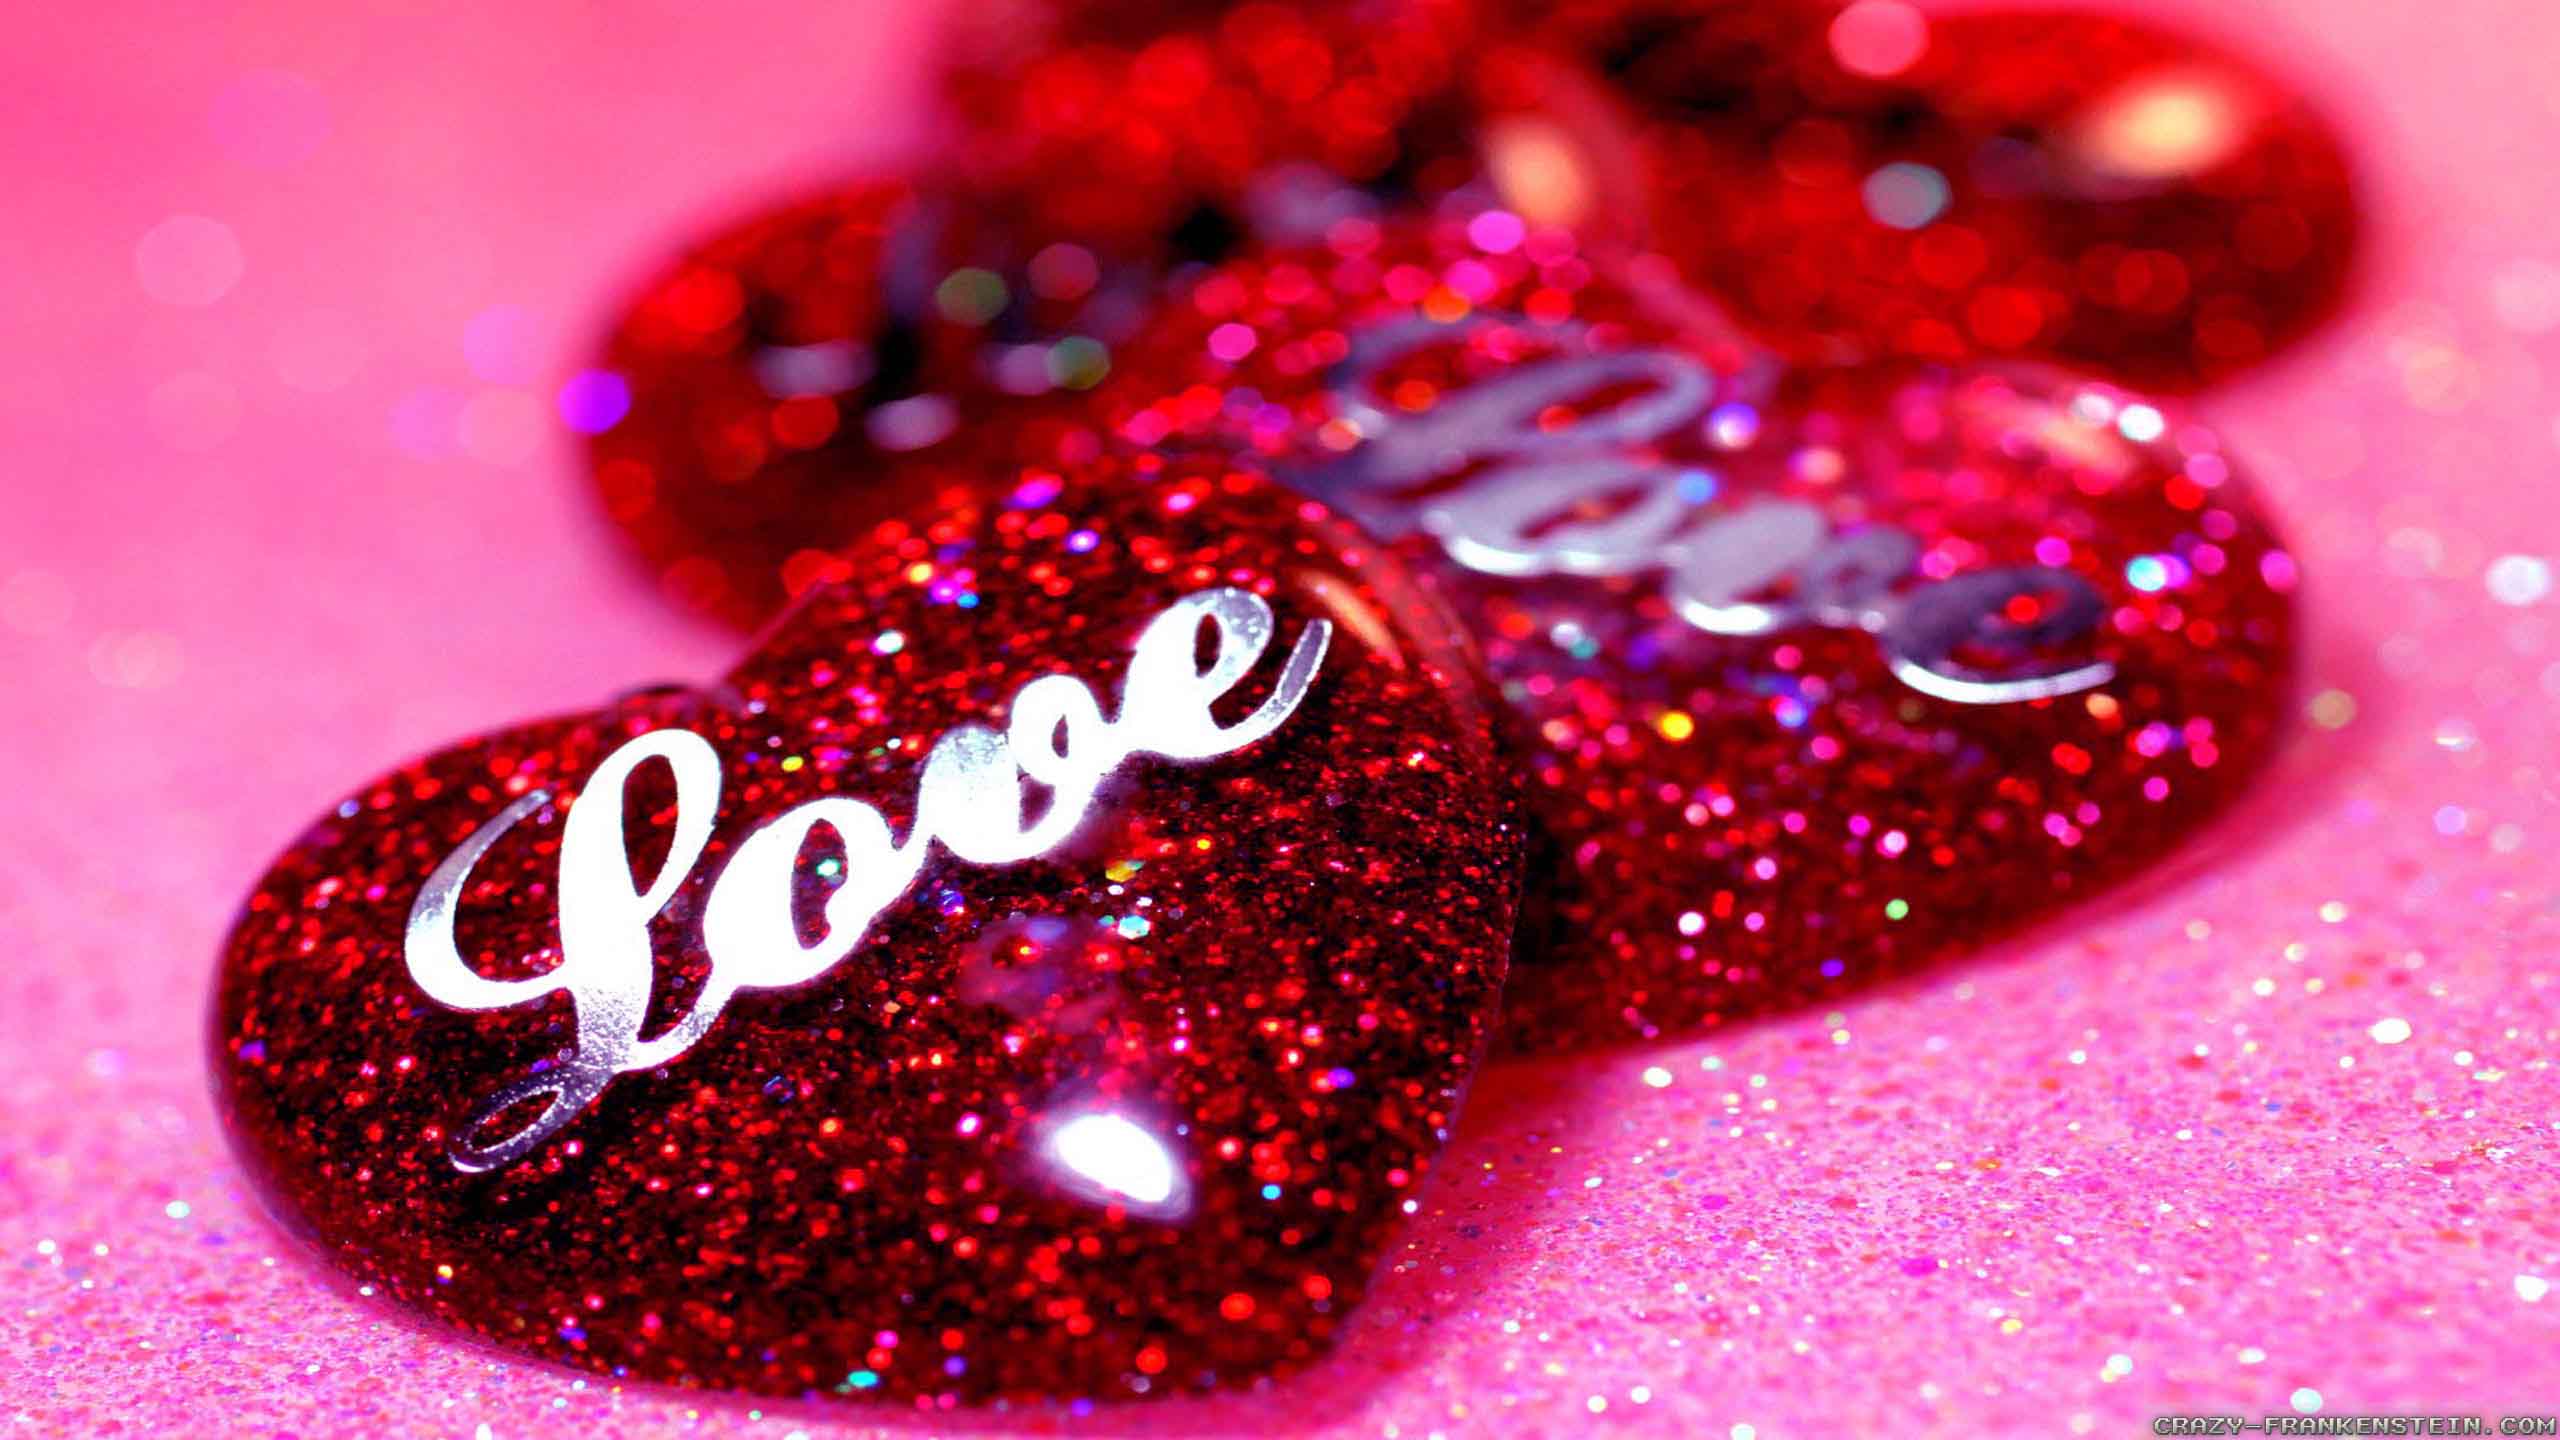 Awesome Latest Wallpapers For Love Hd Image Cave Mobile Phones.